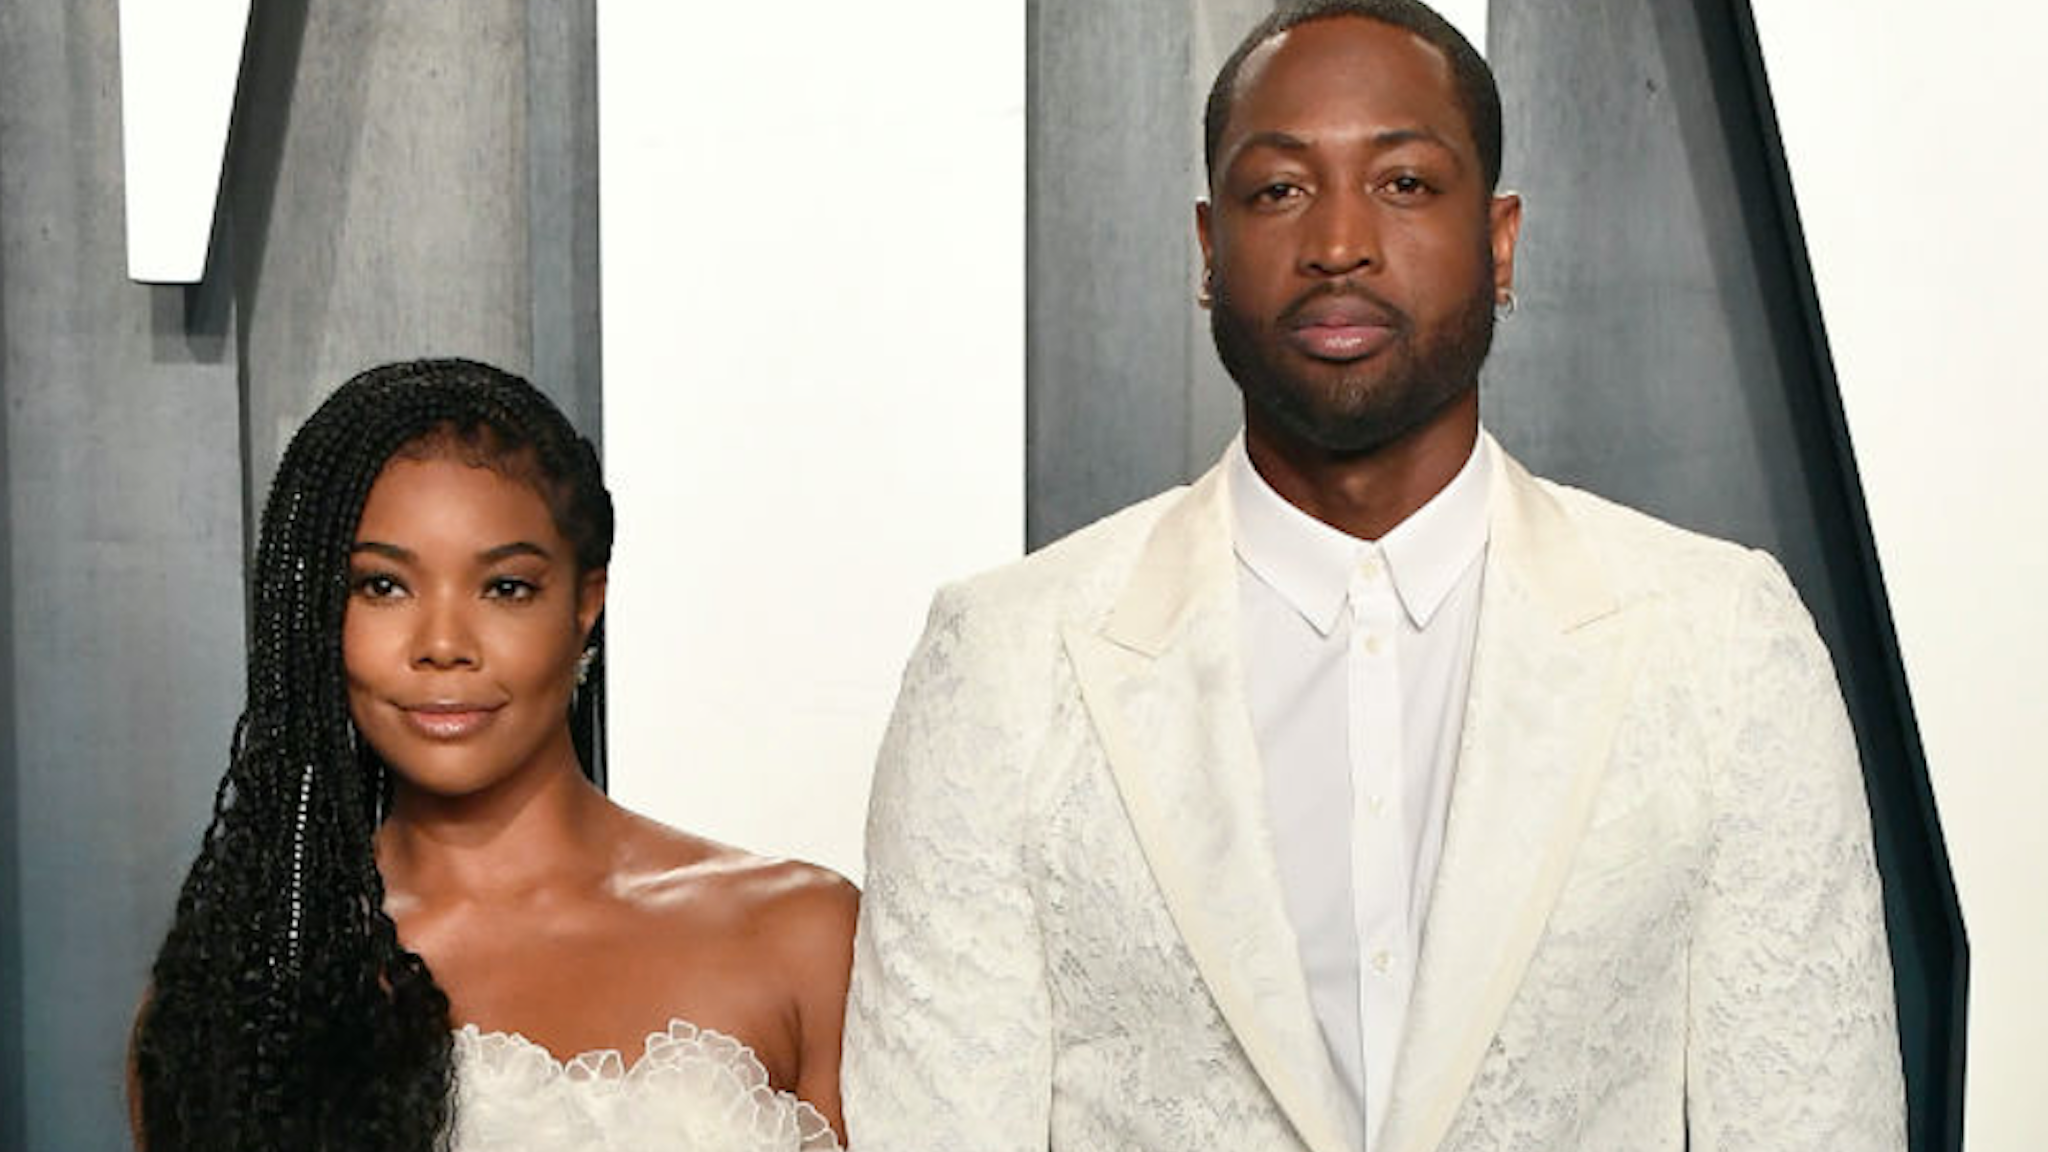 Gabrielle Union and Dwyane Wade attend the 2020 Vanity Fair Oscar Party hosted by Radhika Jones at Wallis Annenberg Center for the Performing Arts on February 09, 2020 in Beverly Hills, California.